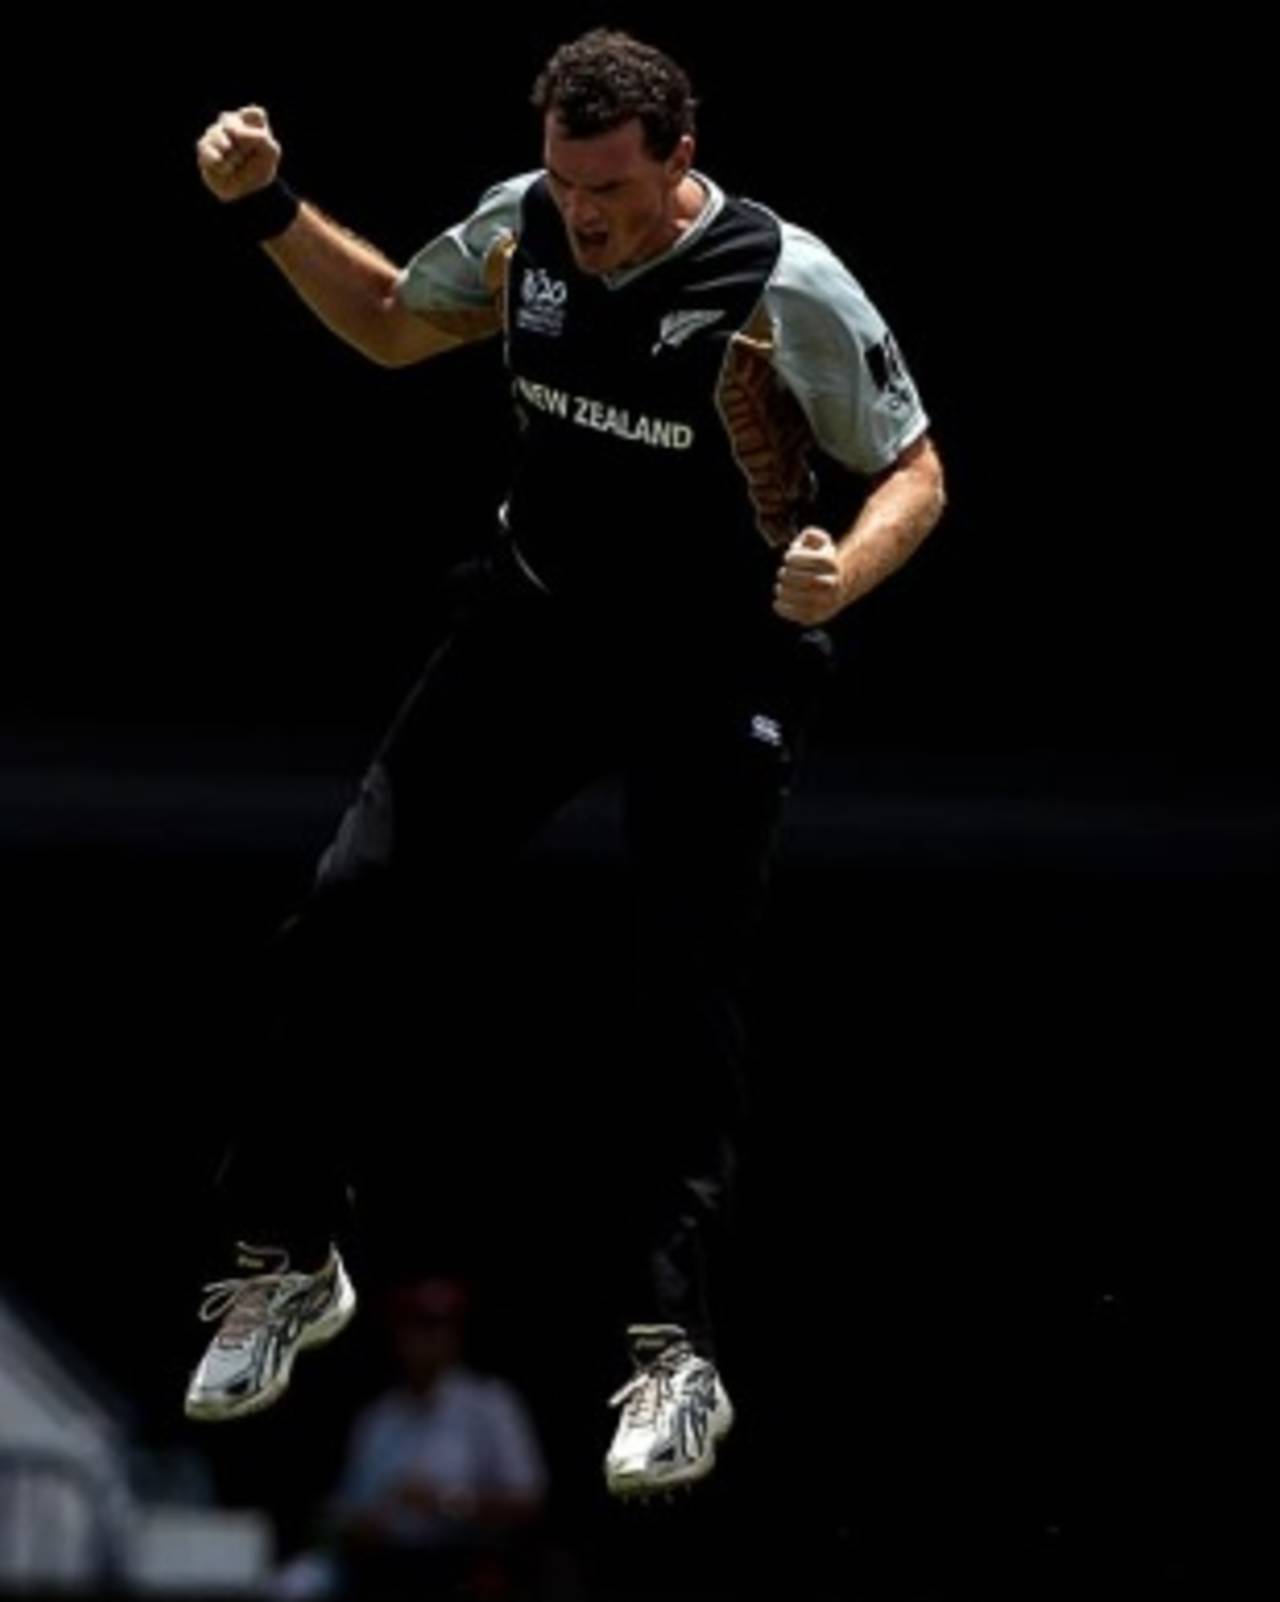 Kyle Mills got rid of the Akmal brothers, New Zealand v Pakistan, Super Eights, Group E, World Twenty20, Barbados, May 8, 2010

